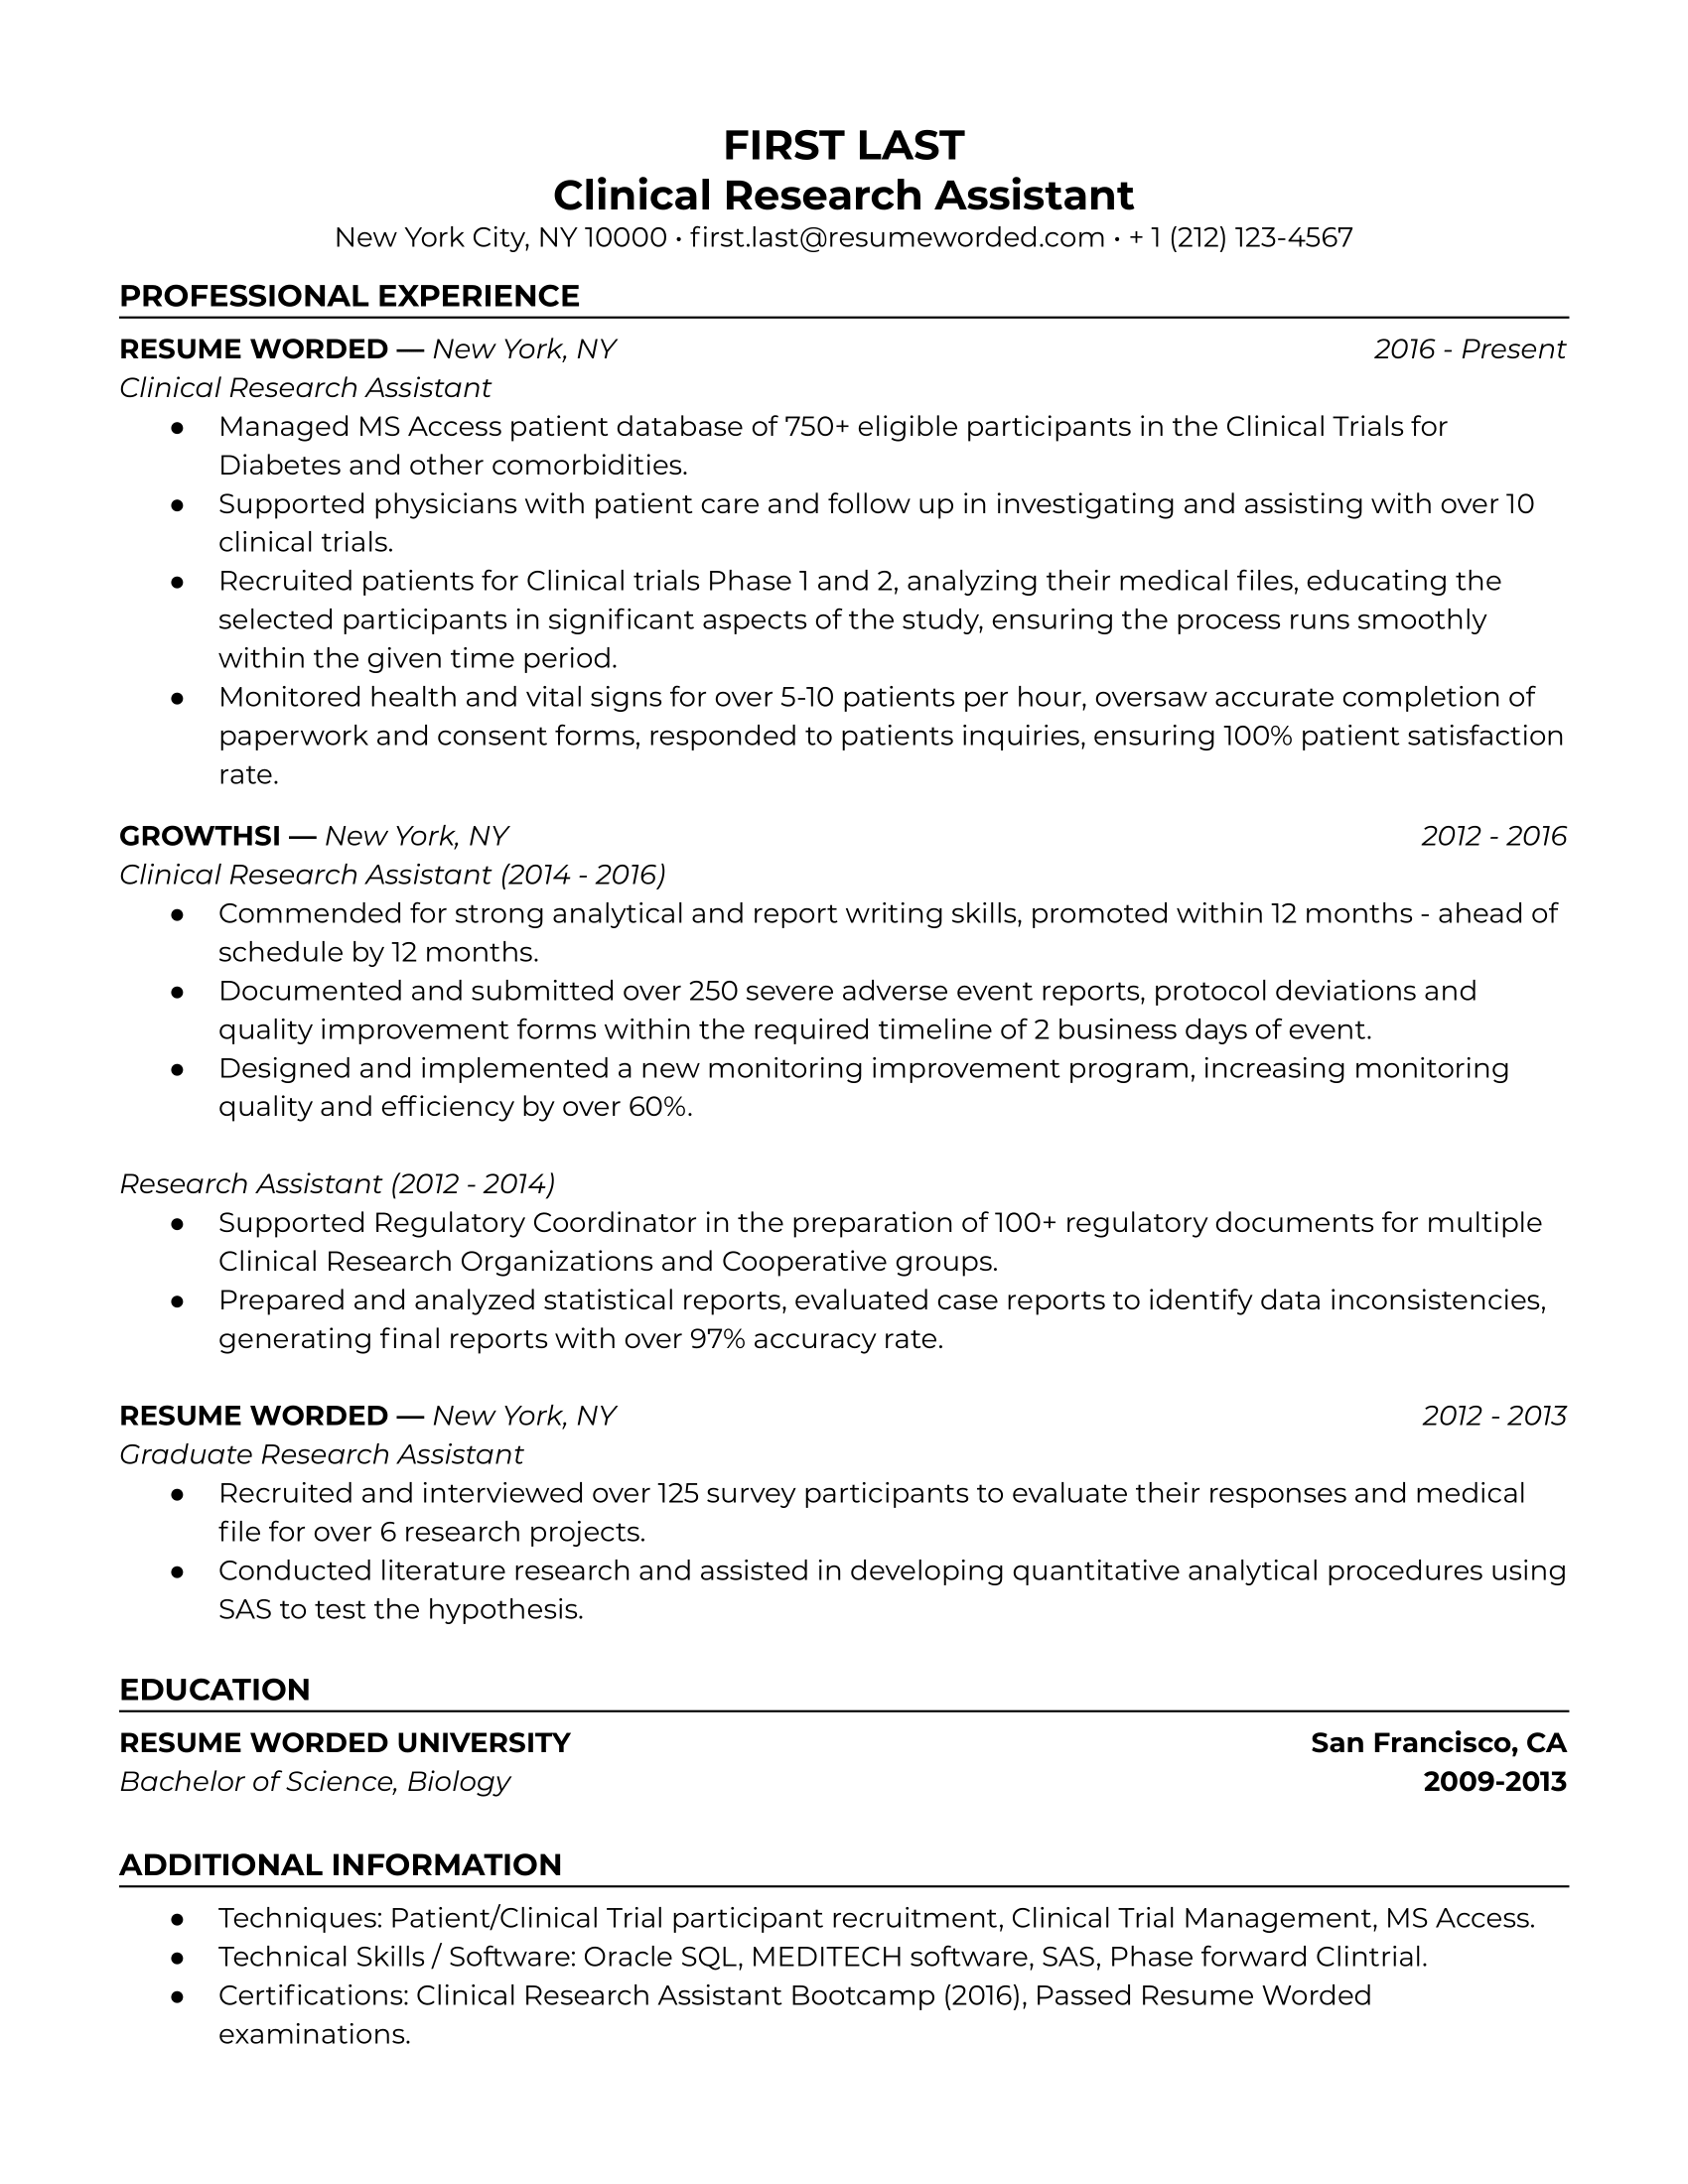 Clinical research assistant resume summary example focused on clinical research experience and using subsections for hard skills